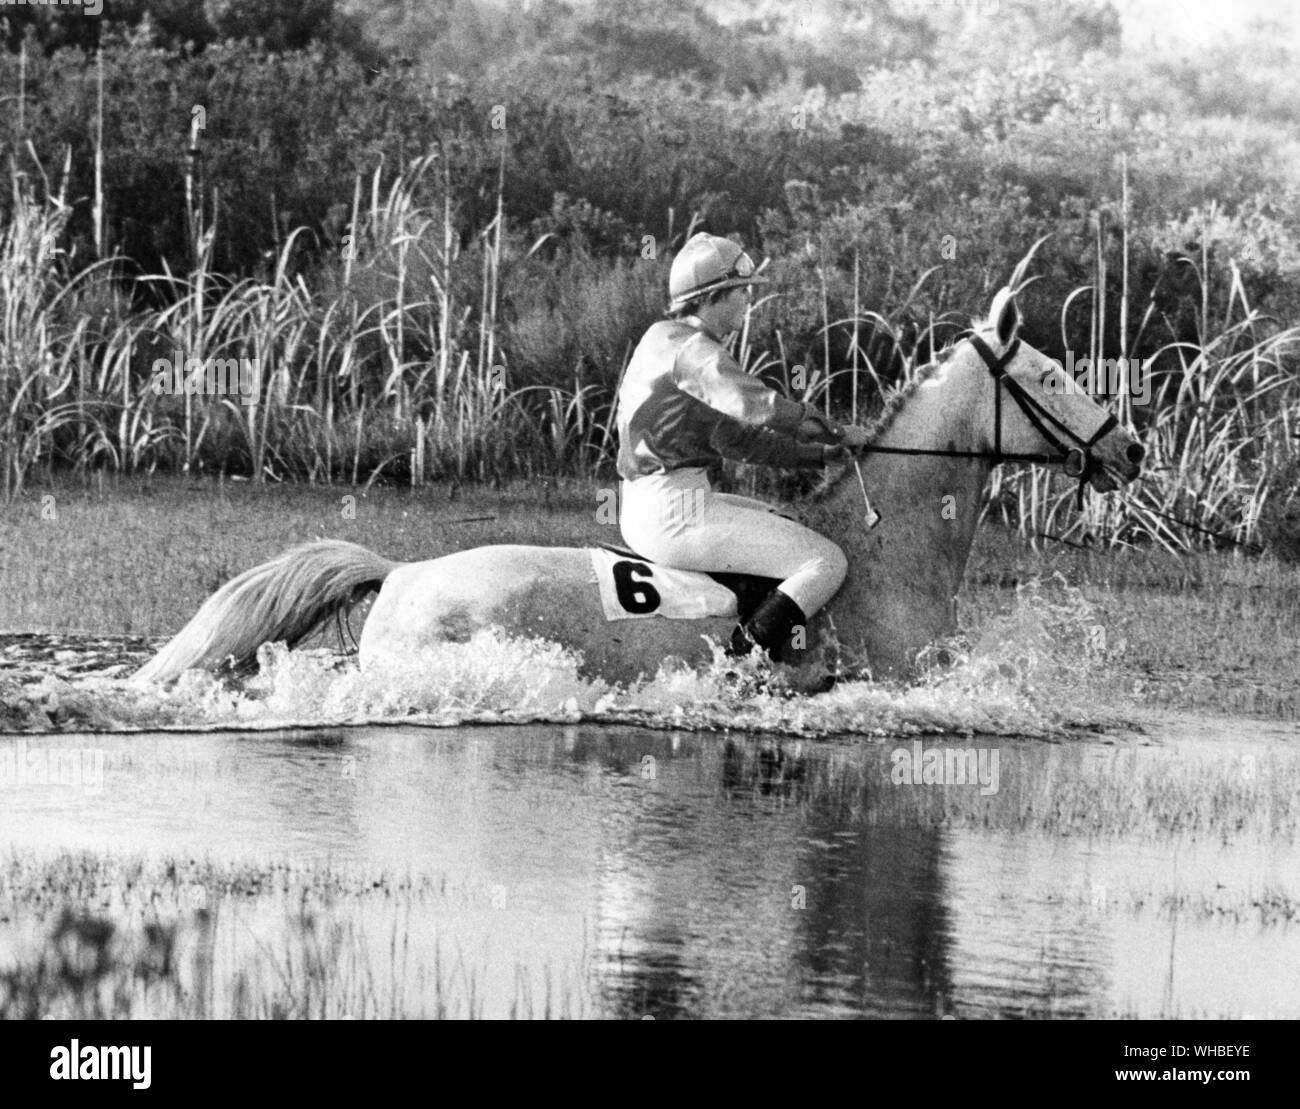 Judy Hinderks riding  the horse High Noon through the deep water during a cross country event Stock Photo